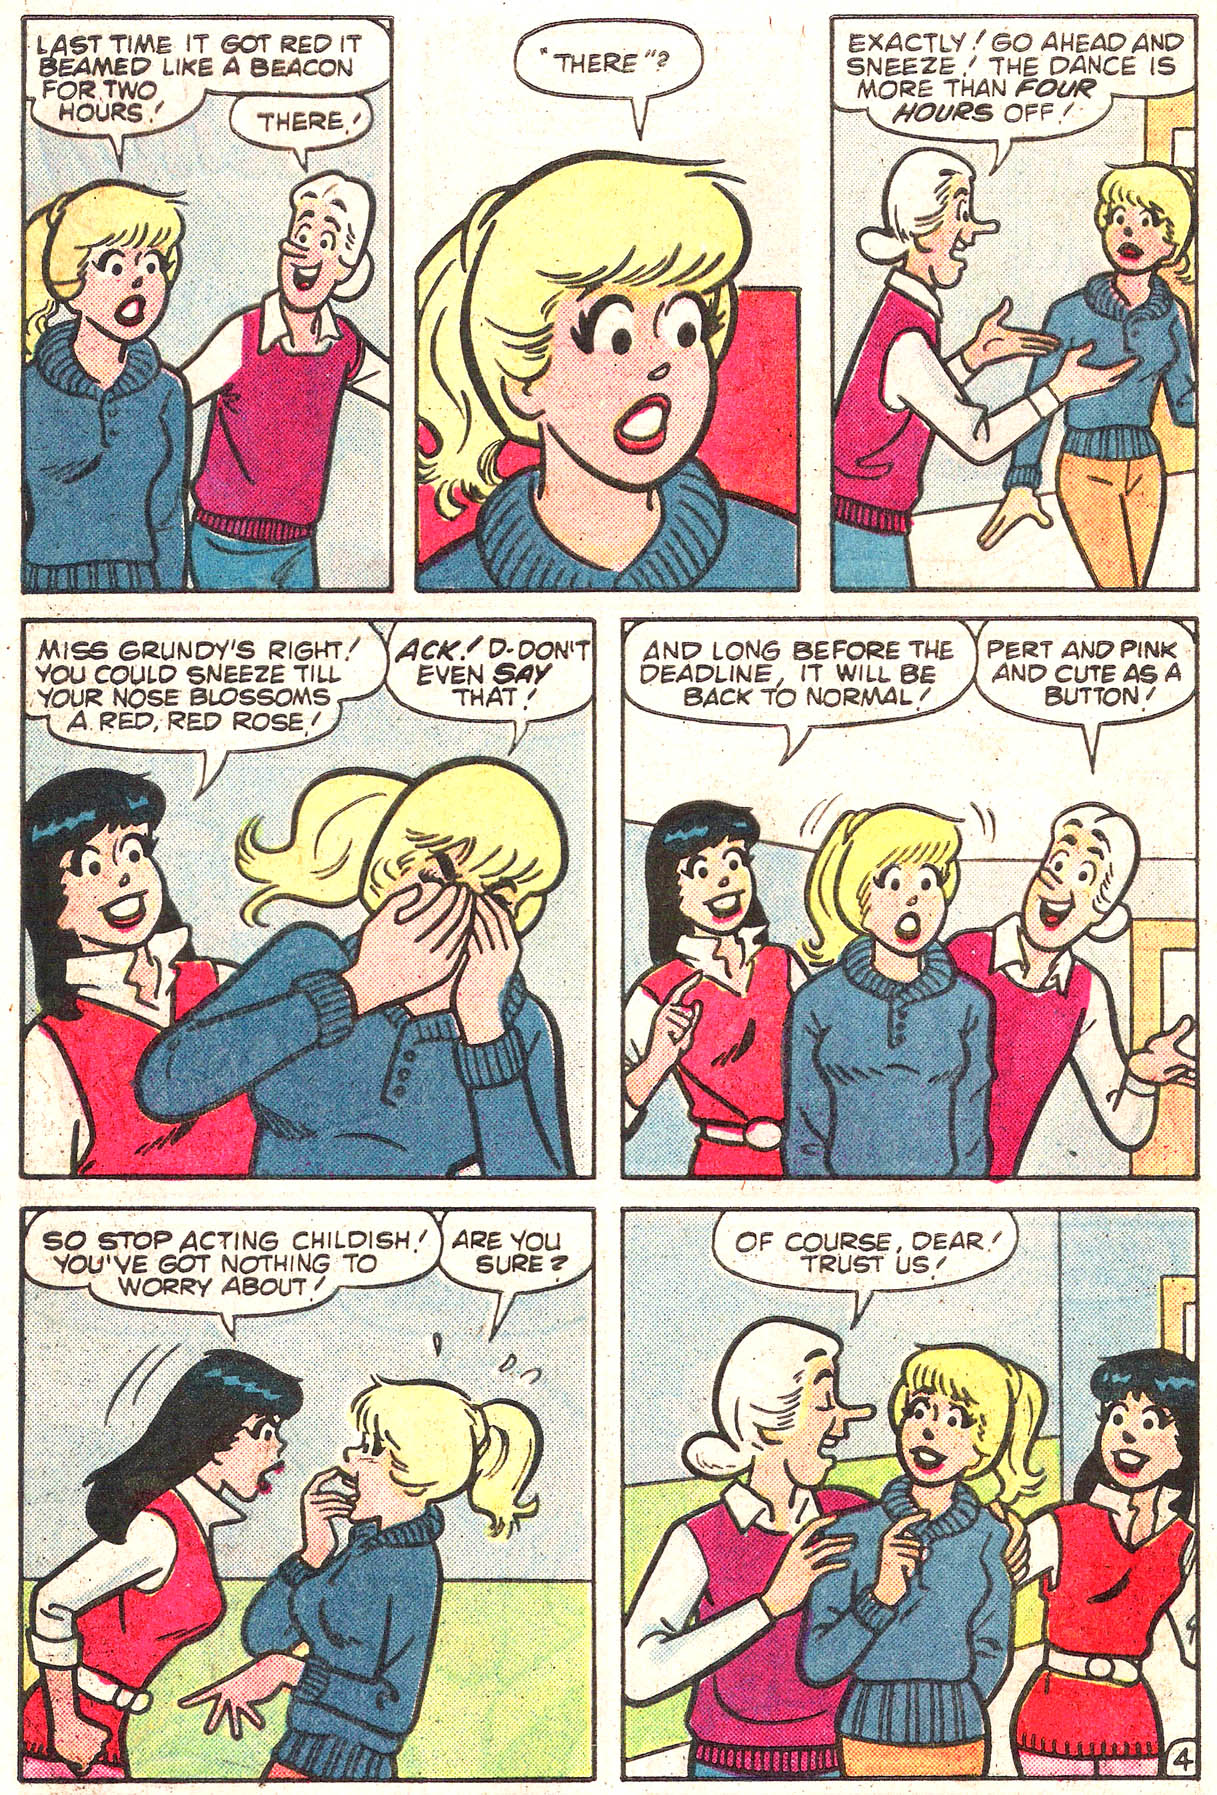 Read online Archie's Girls Betty and Veronica comic -  Issue #340 - 32